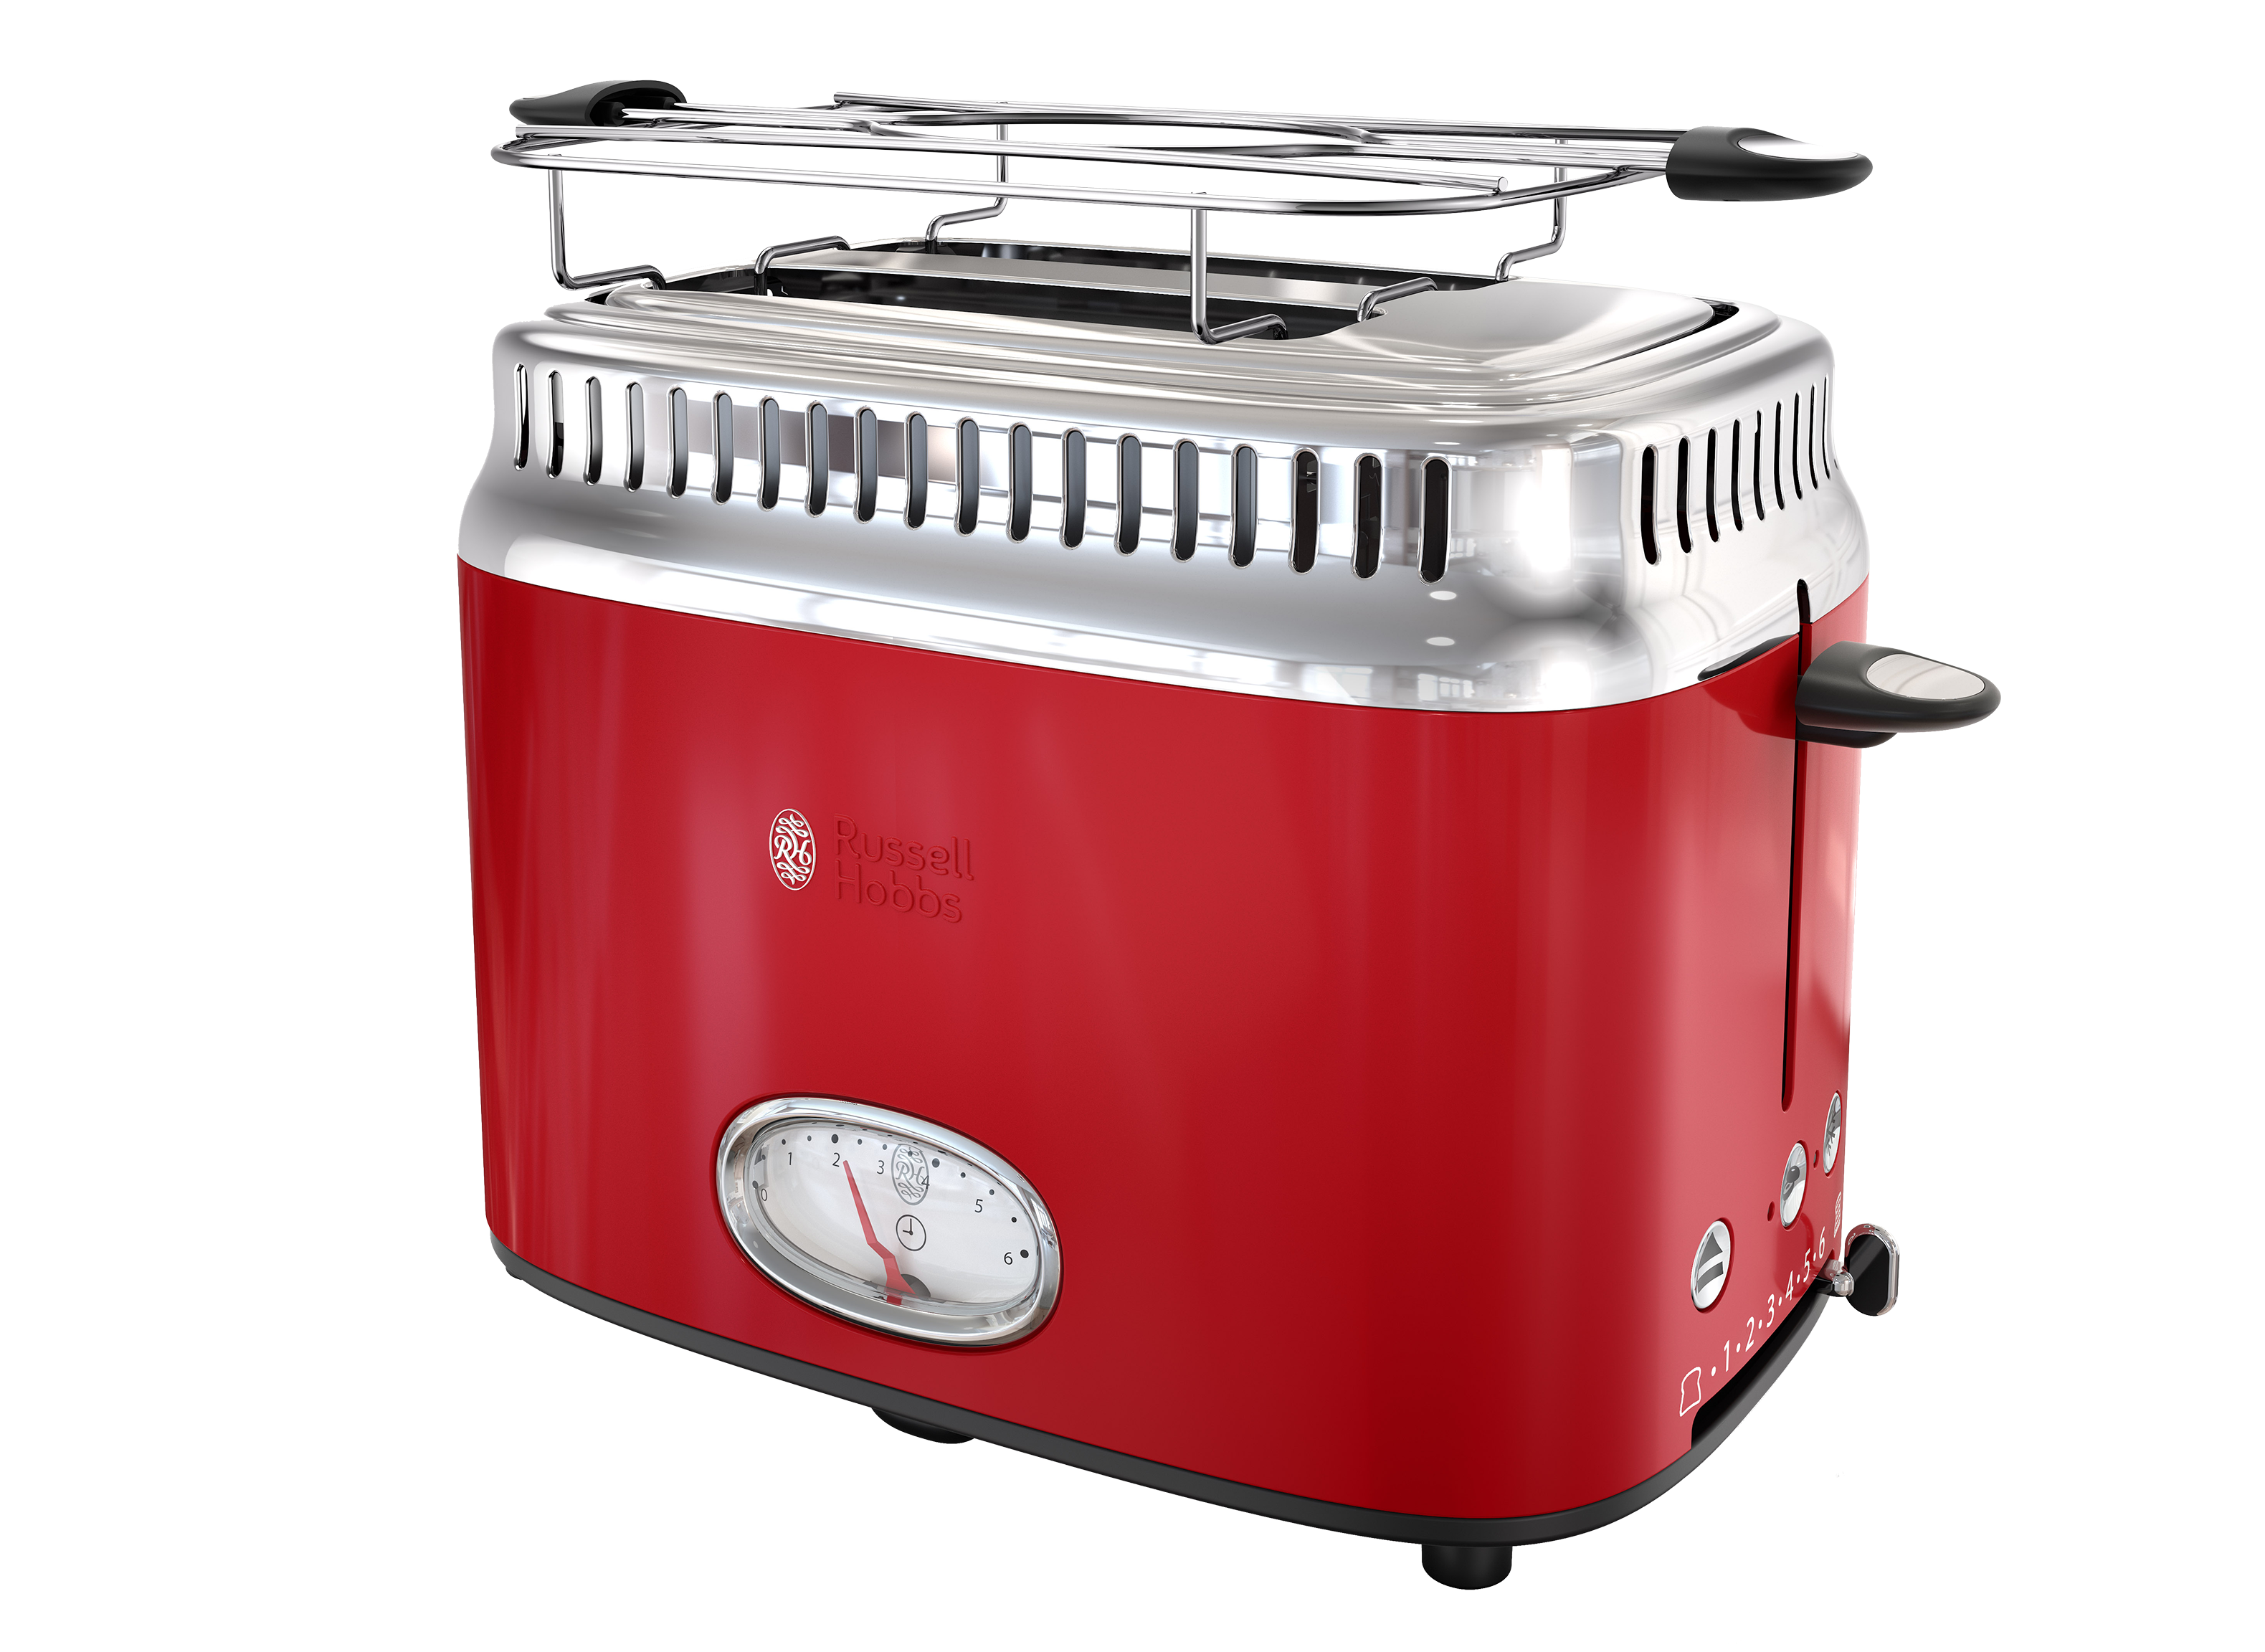 Russell Hobbs Retro Style 2-Slice Toaster, Red, TR9150RDR